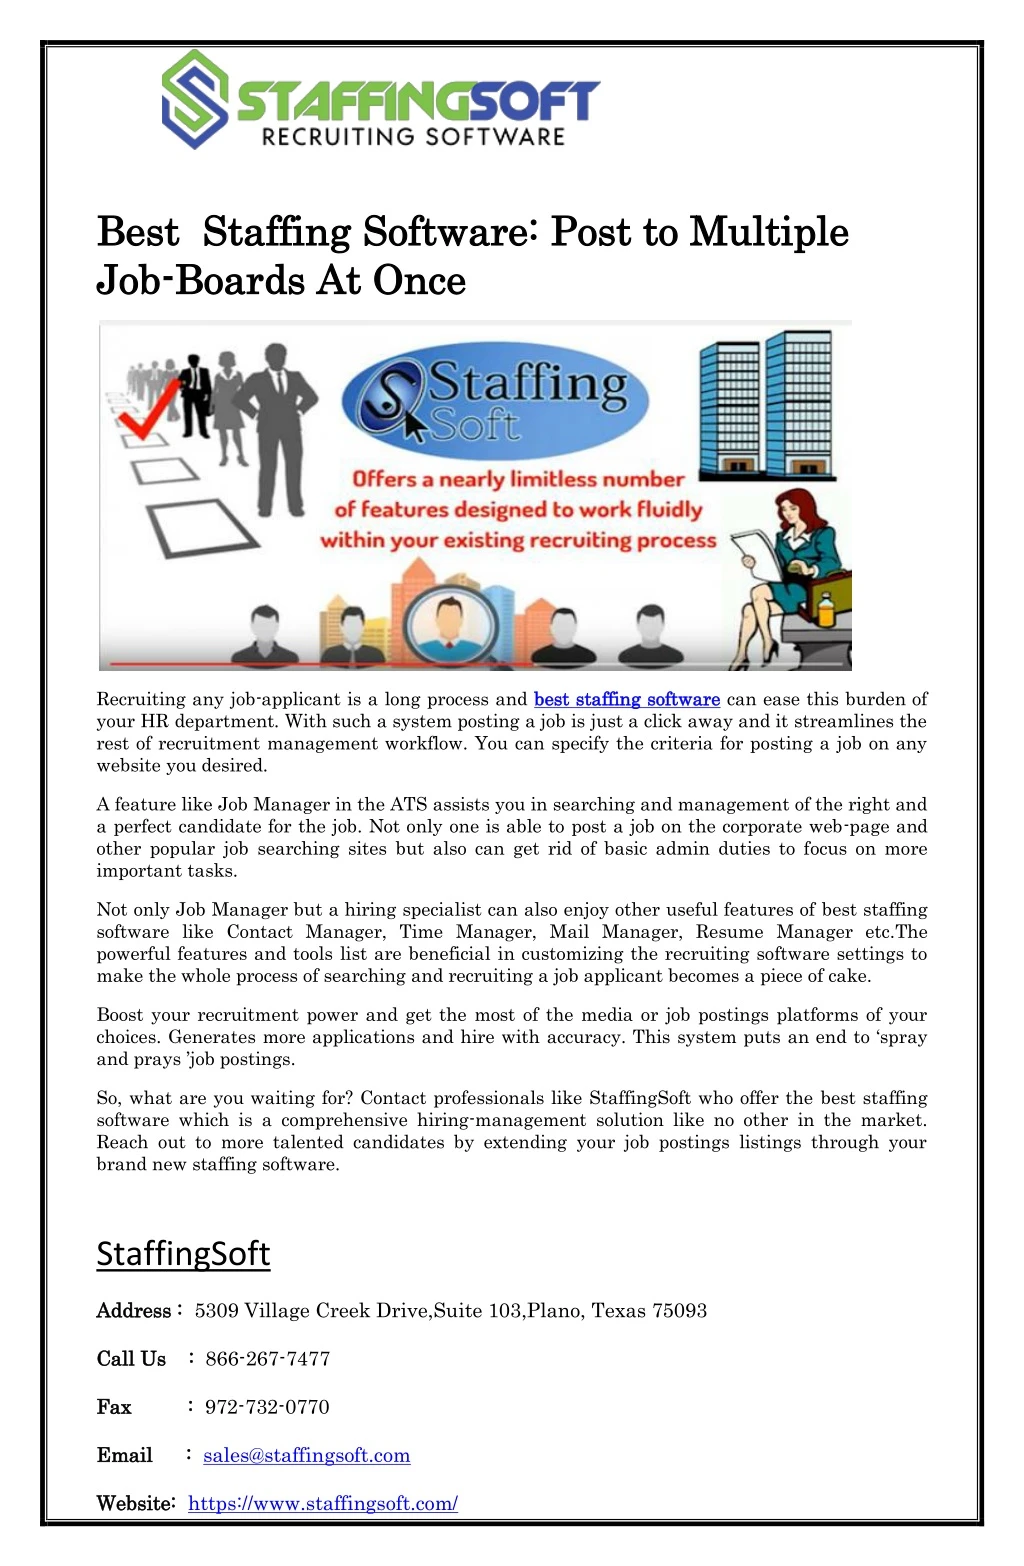 best best s staffing taffing s software post